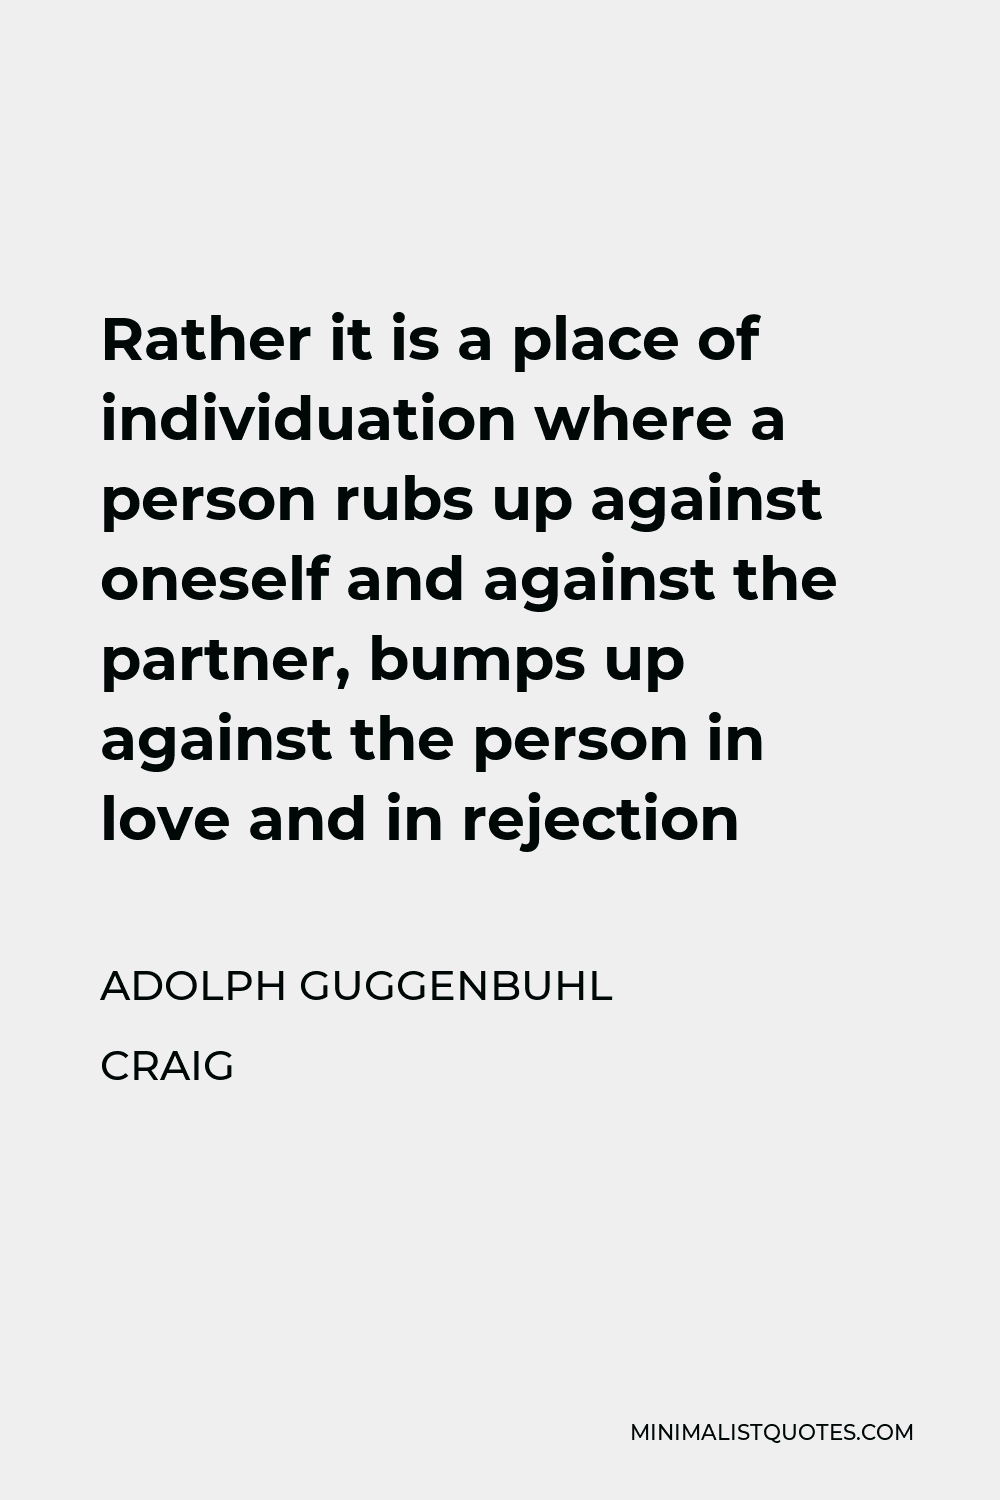 Adolph Guggenbuhl Craig Quote - Rather it is a place of individuation where a person rubs up against oneself and against the partner, bumps up against the person in love and in rejection